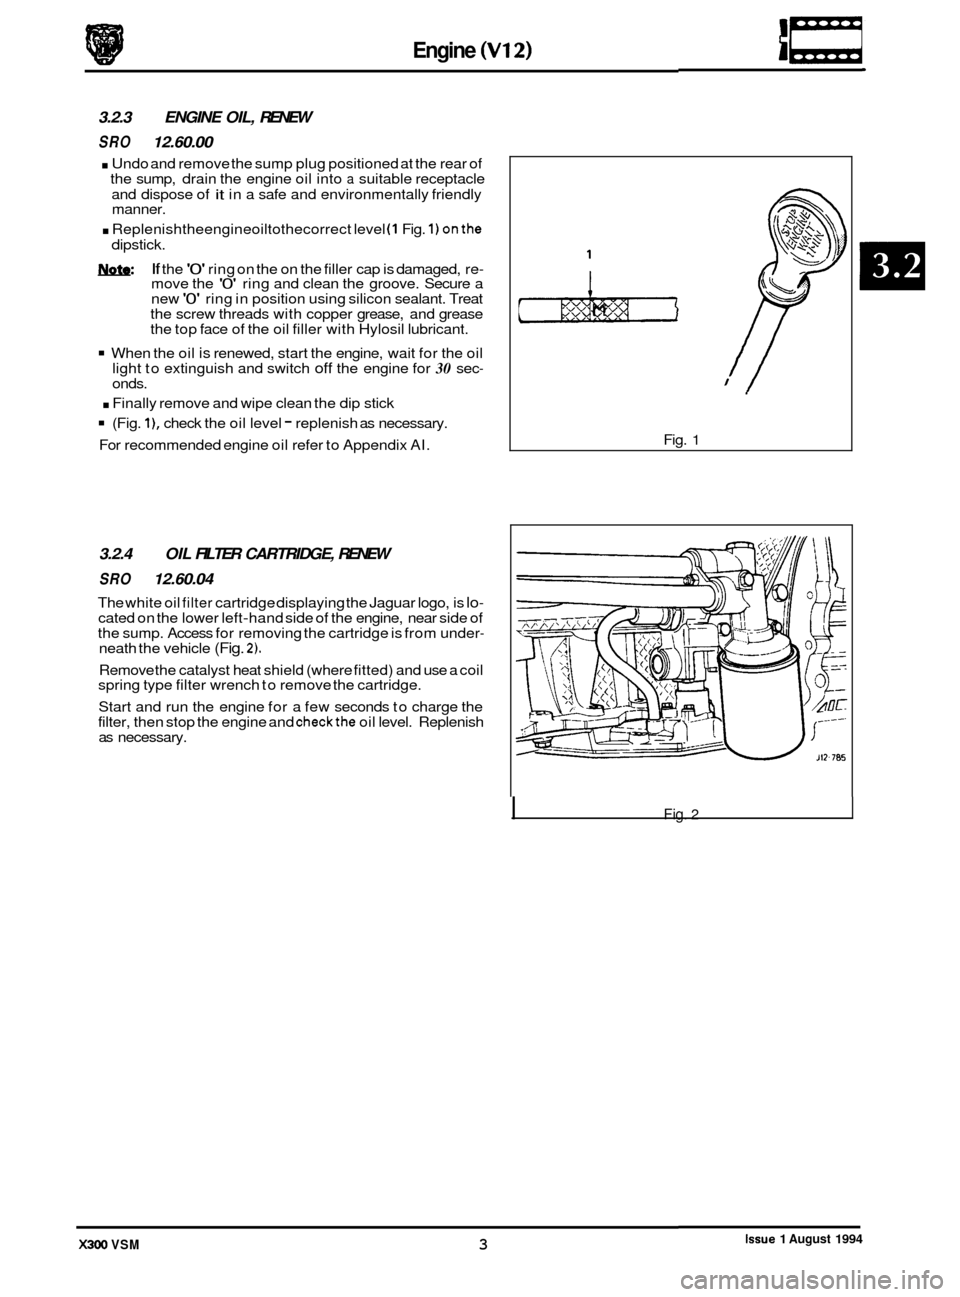 JAGUAR XJ6 1994 2.G Service Manual Engine (V12) 
3.2.3 ENGINE OIL, RENEW 
SRO 12.60.00 
. Undo  and remove the sump  plug positioned  at the  rear  of 
the  sump,  drain the  engine oil into a suitable  receptacle 
and  dispose  of 
it